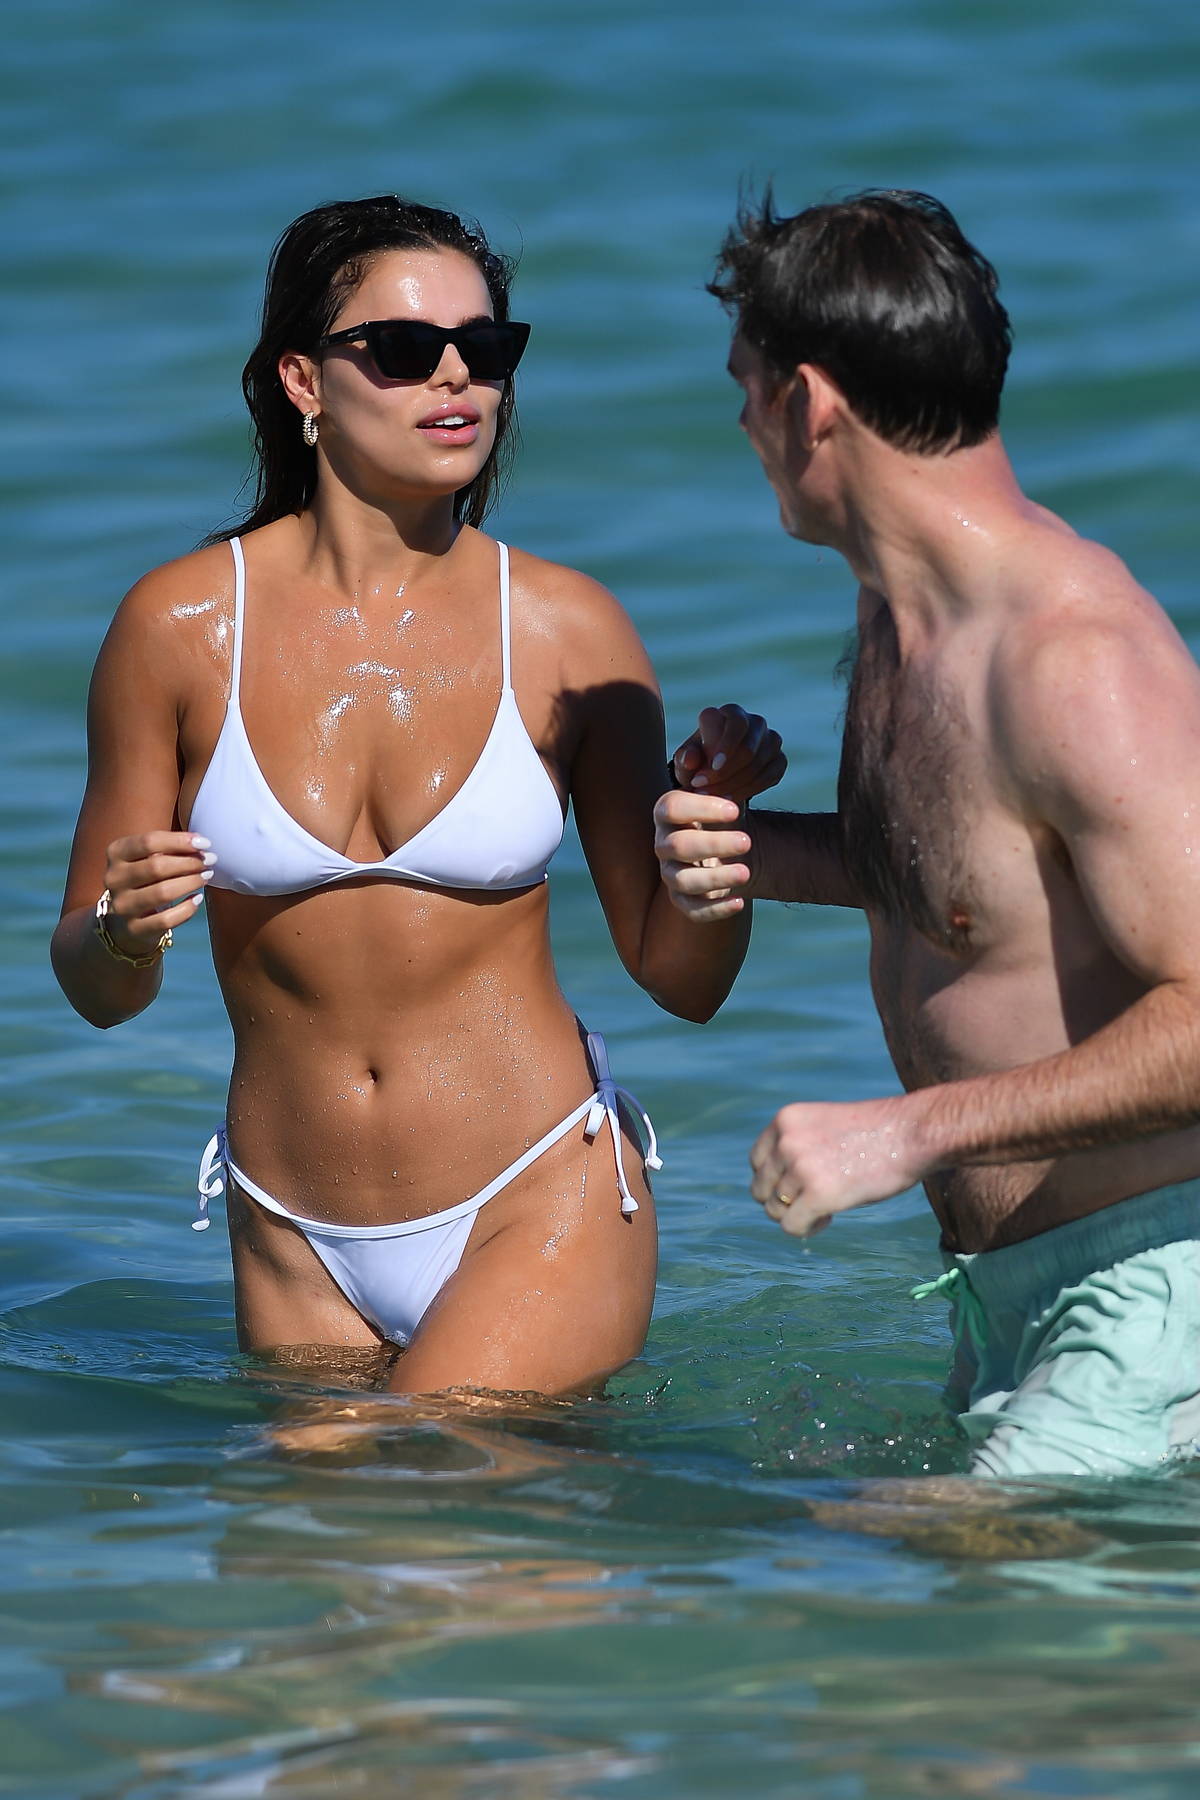 Brooks Nader shows off her incredible figure in tiny thong bikini as model  enjoys a day at the beach with hunky husband Billy Haire in Mexico